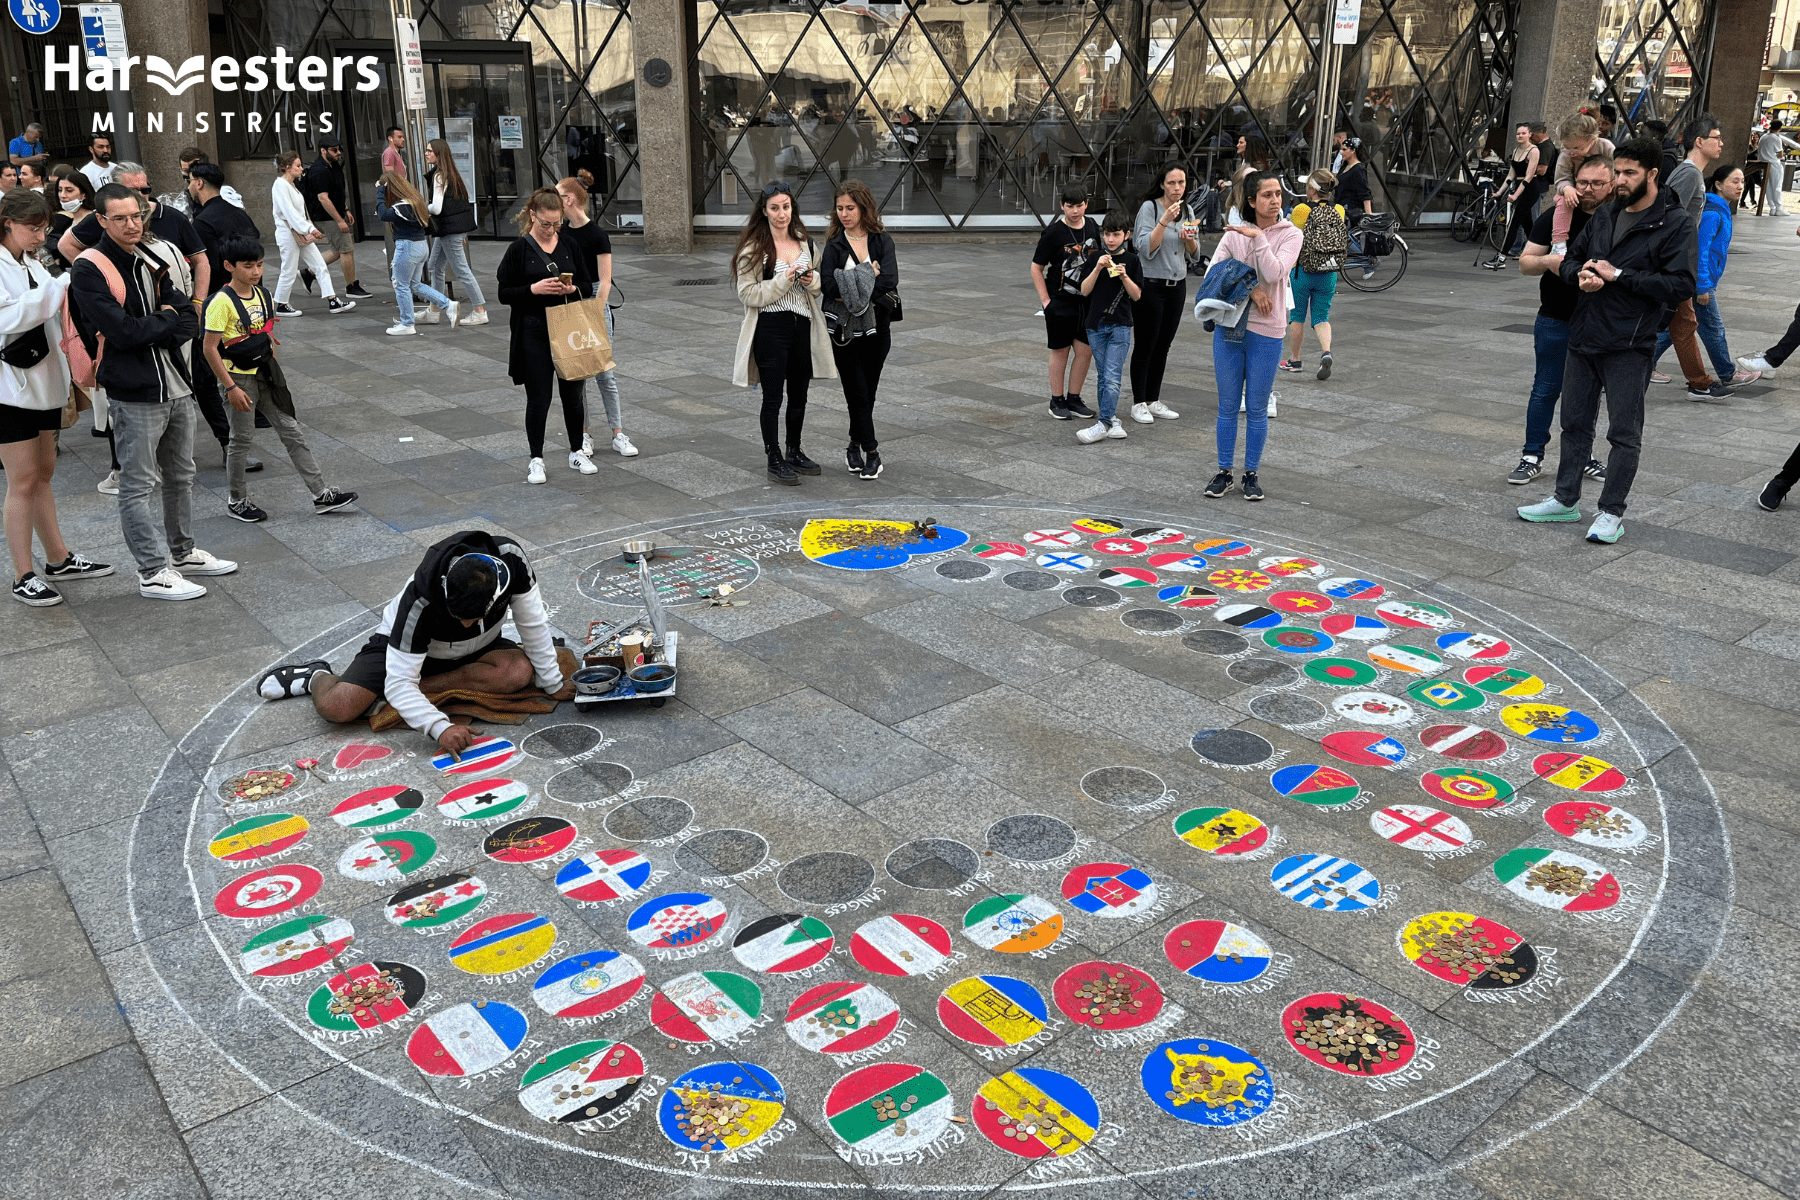 Street artist paints flags of Europe. Harvesters Ministries